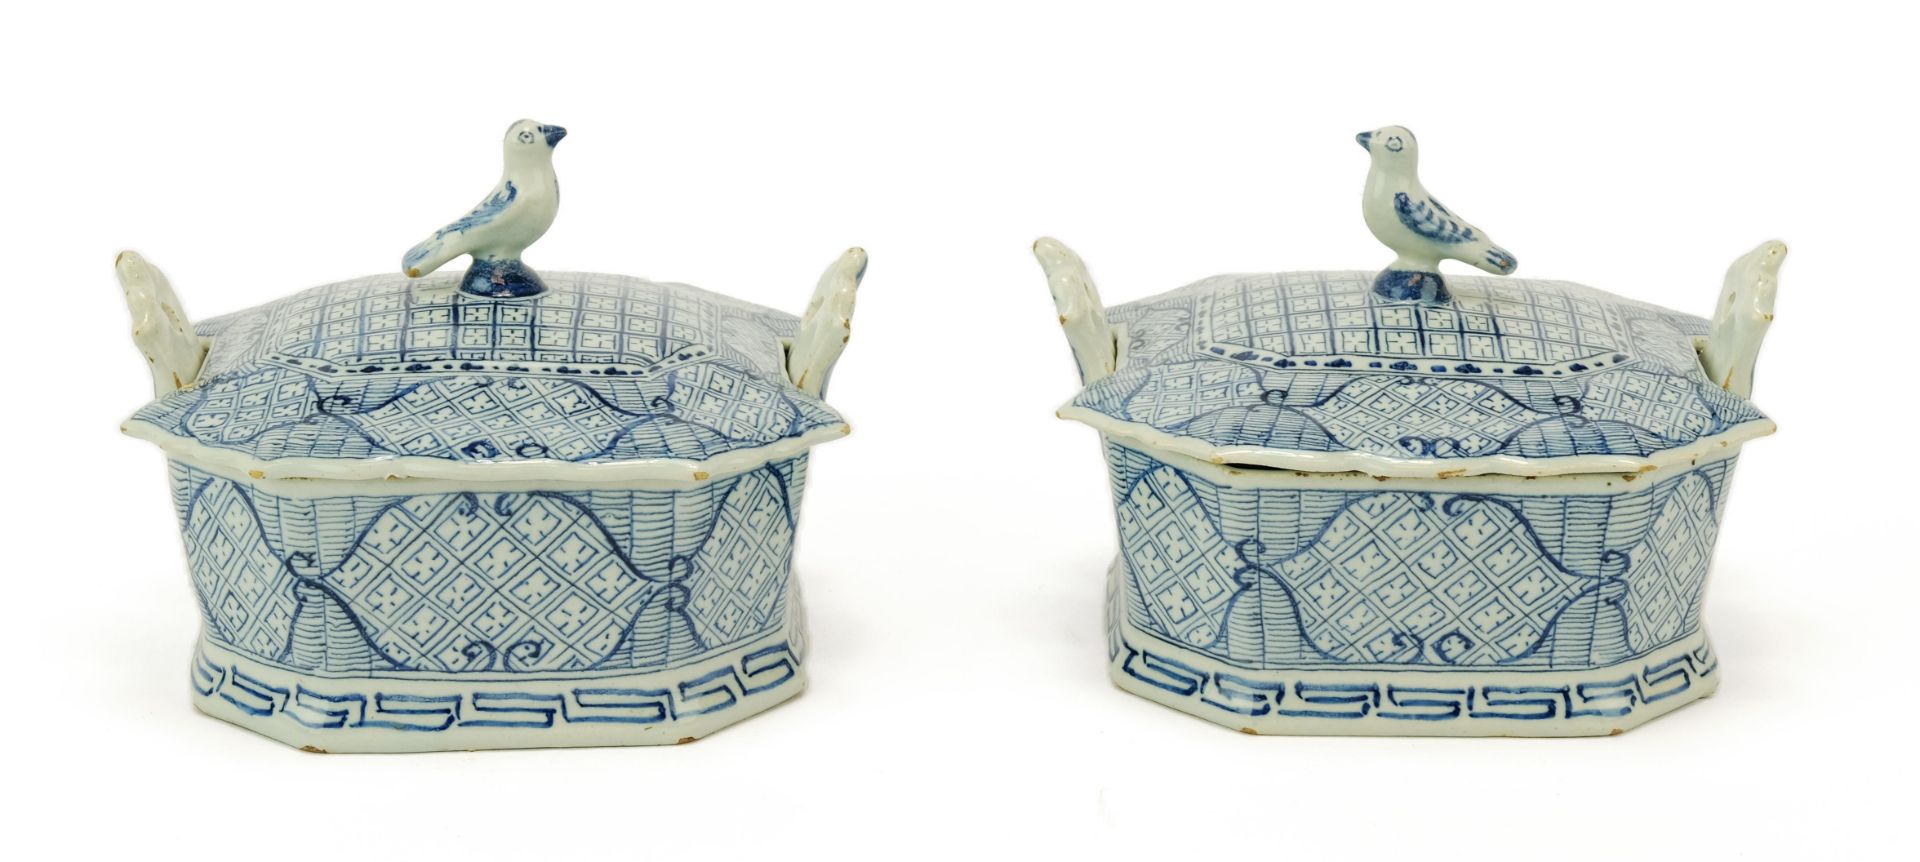 A pair of Dutch Delft blue and white butter dishes with bird finials